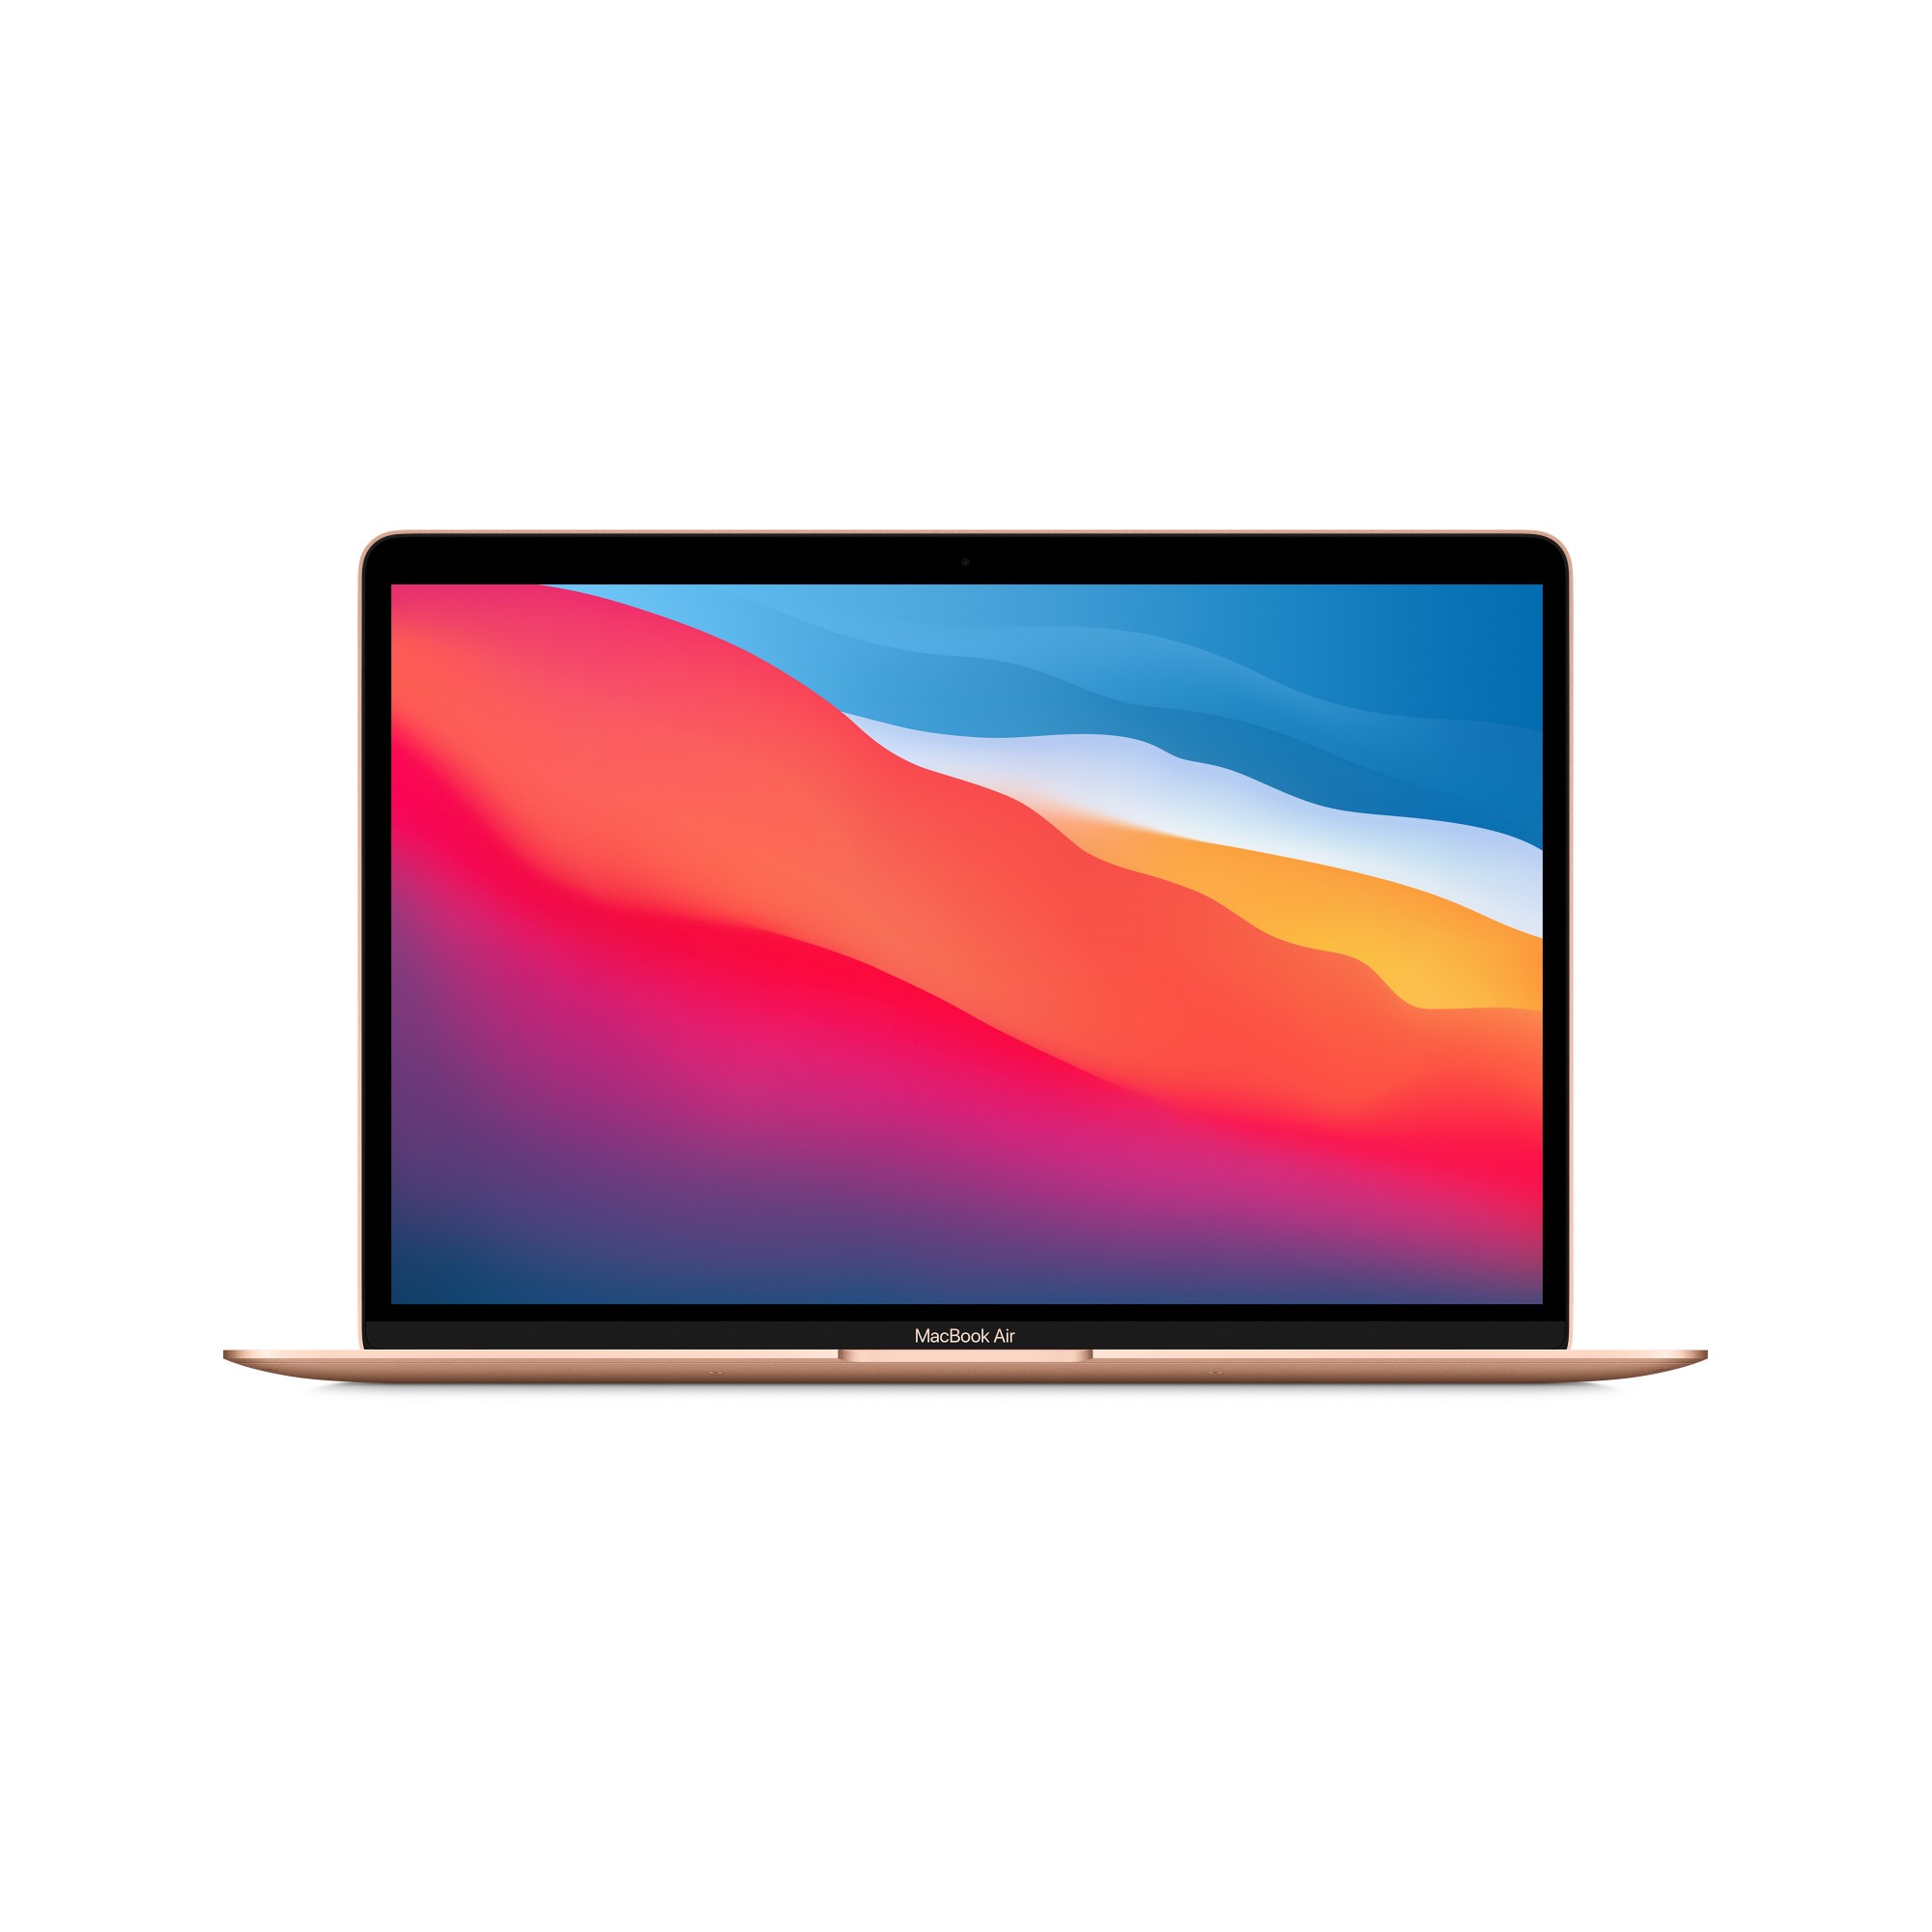 MacBook Air, 13", Gold, Apple M1 chip with 8?core CPU and 7?core GPU, 8GB unified memory, 256GB SSD storage, 16-core Neural Engine, Backlit Magic Keyboard - British UK Power Supply